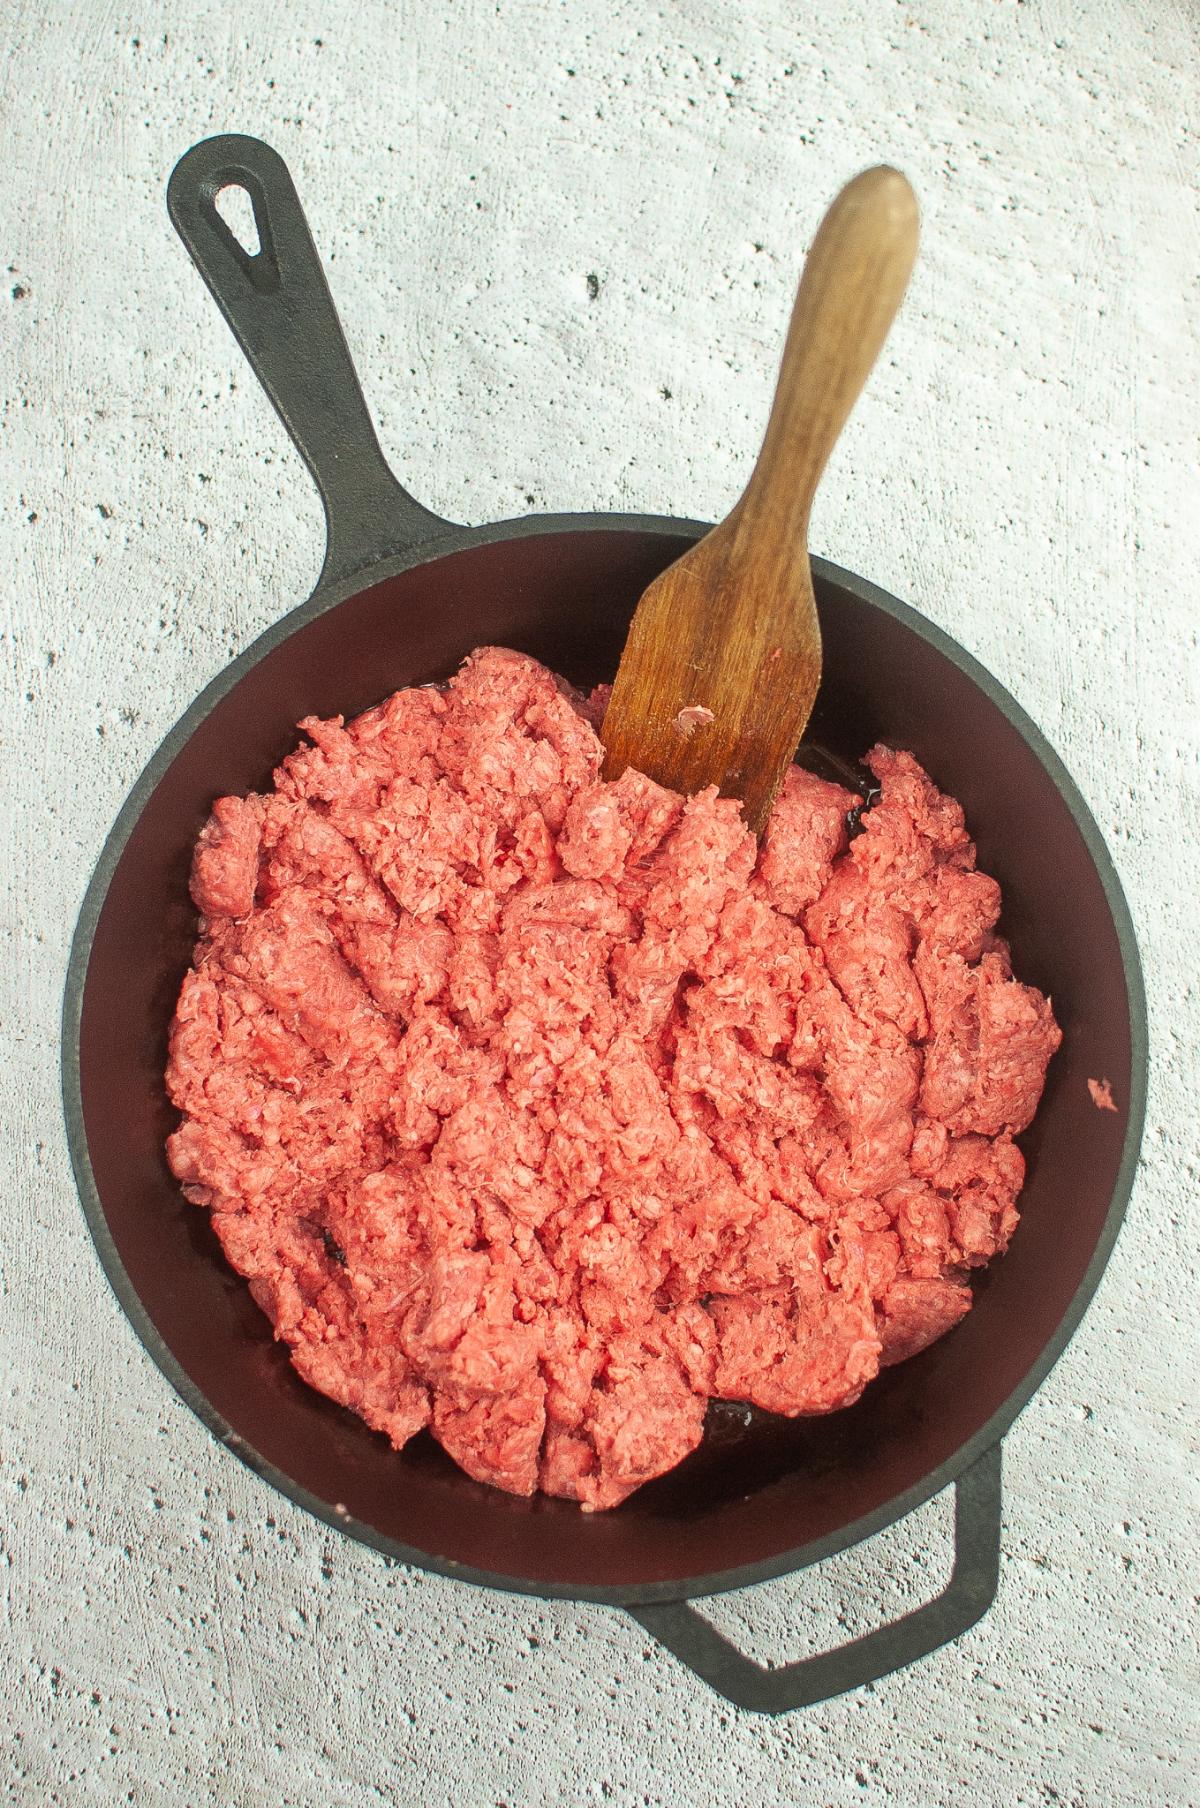 Ground beef cooking in a Dutch oven with wooden spoon in it.